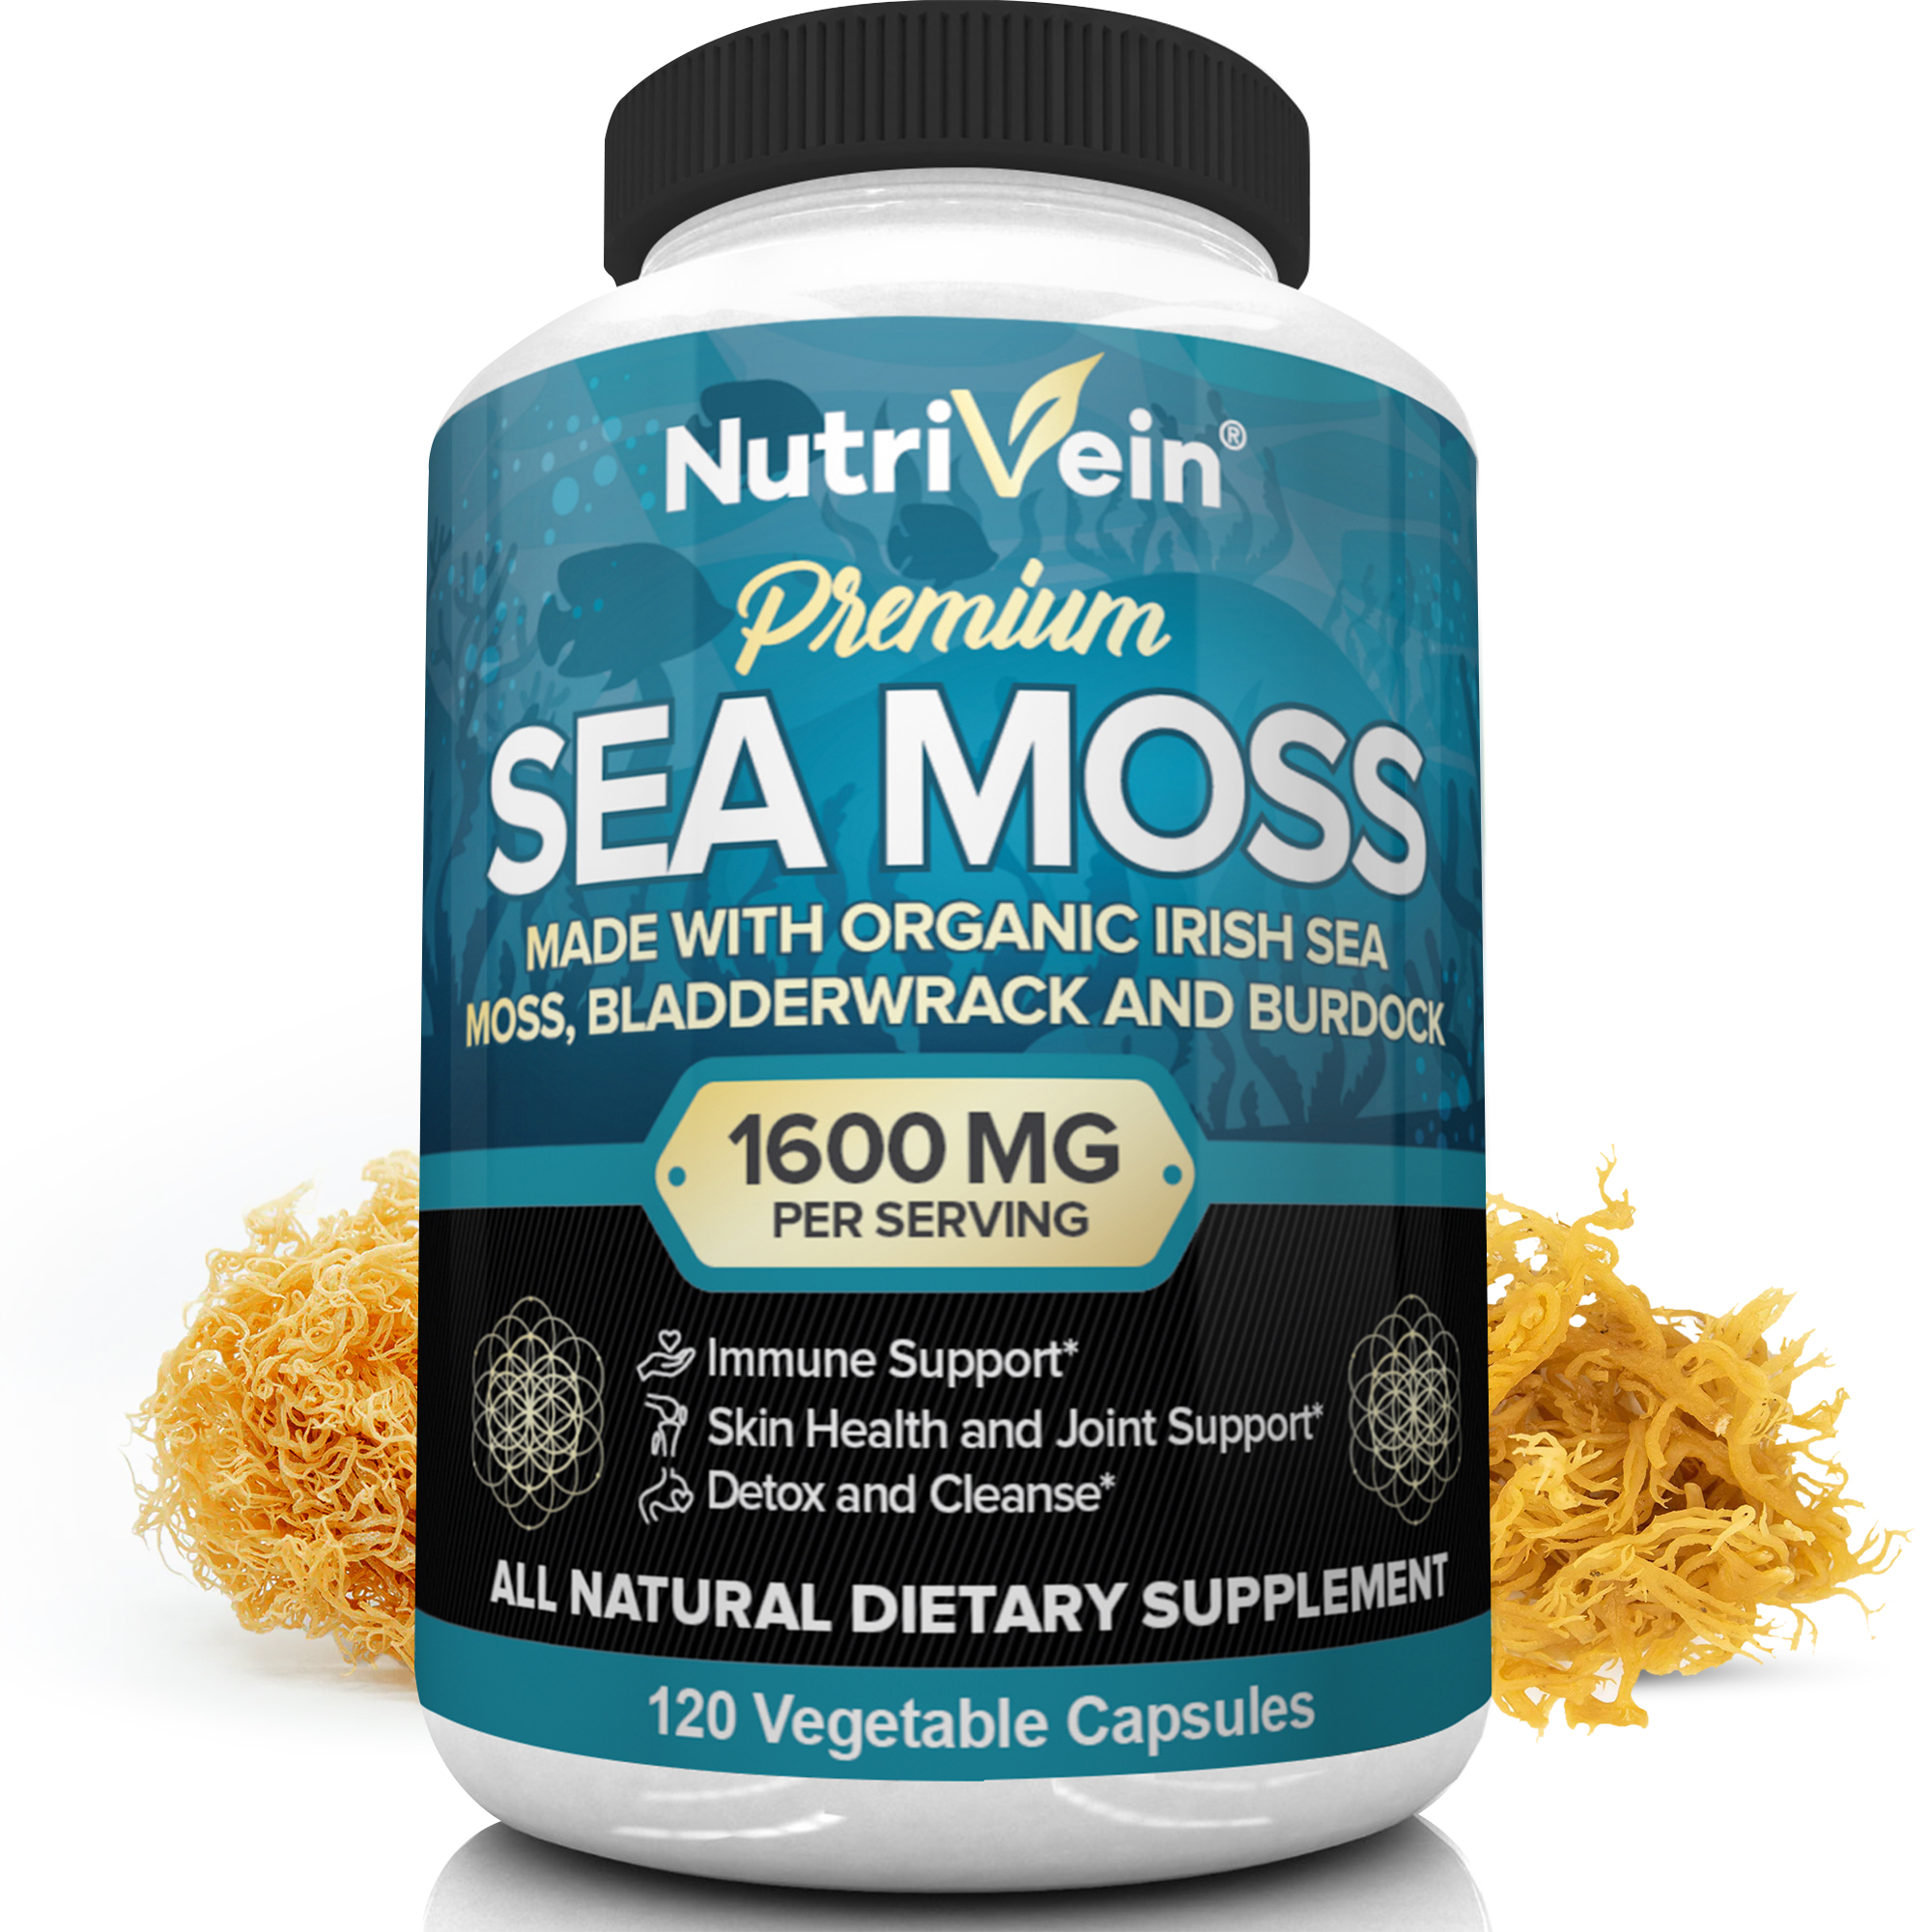 Nutrivein Organic Sea Moss 1600mg - 120 Capsules - Keto Detox, Gut, Joint Support - image 1 of 7